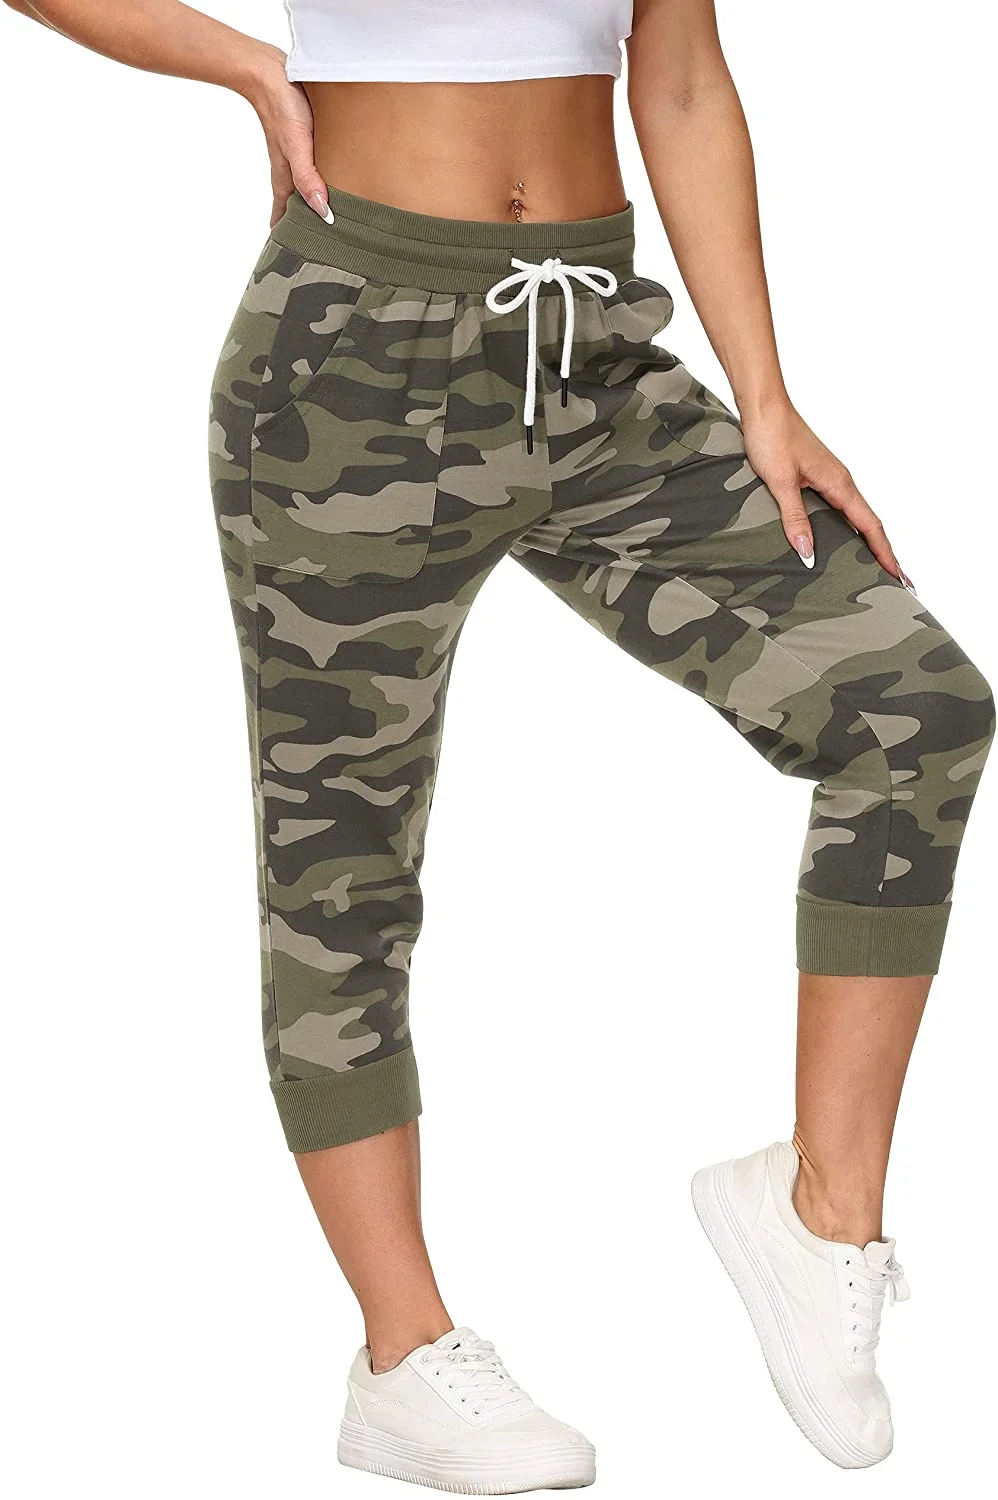 Women’s Sweatpants Capri Pants Cropped Jogger Running Pants Lounge Loose Fit Drawstring Waist With Side Pockets